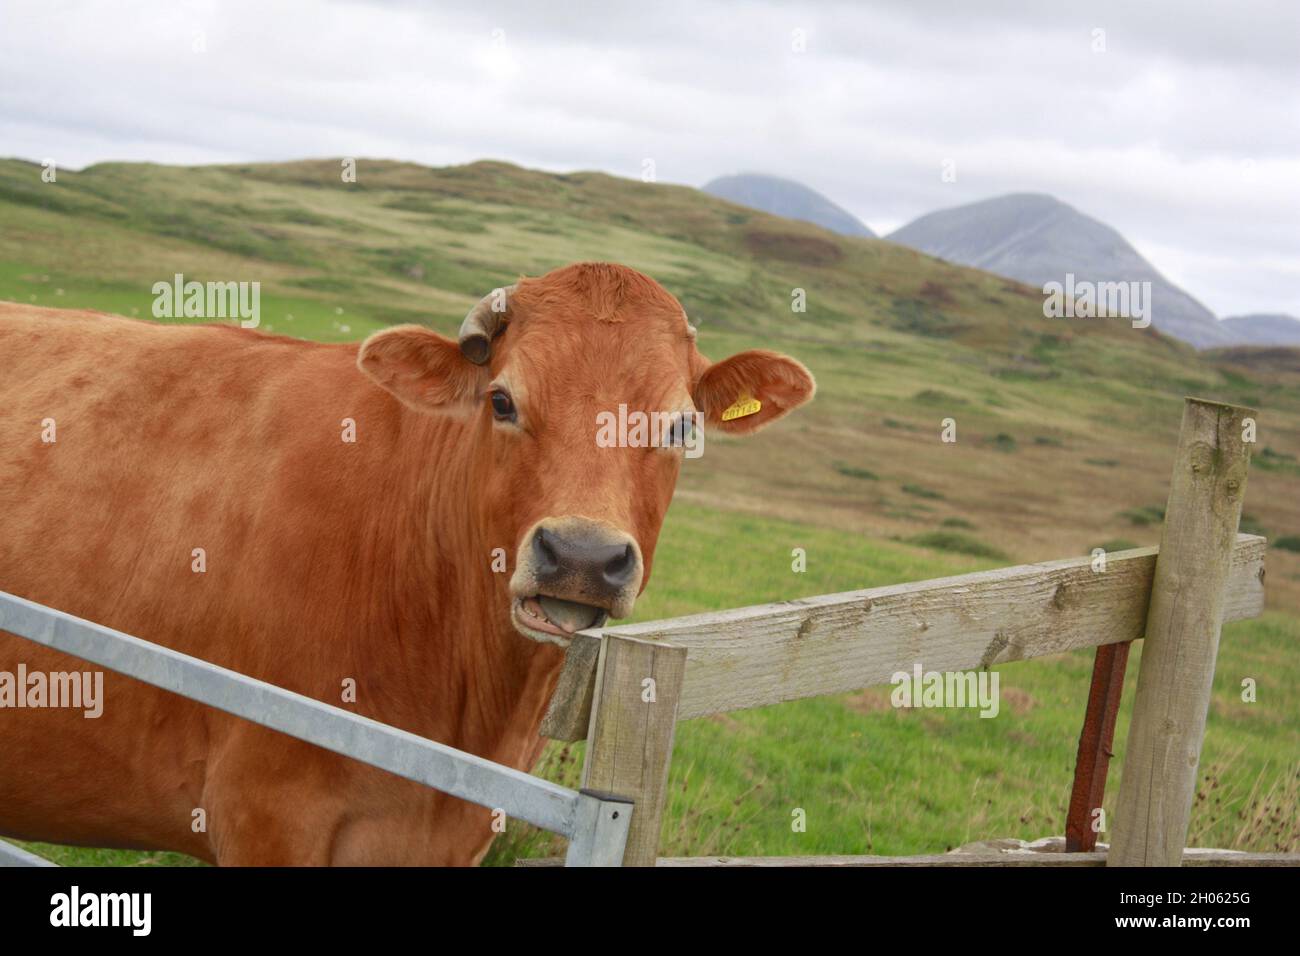 An orange-brown cow stands behind a fence in Scotland. Stock Photo